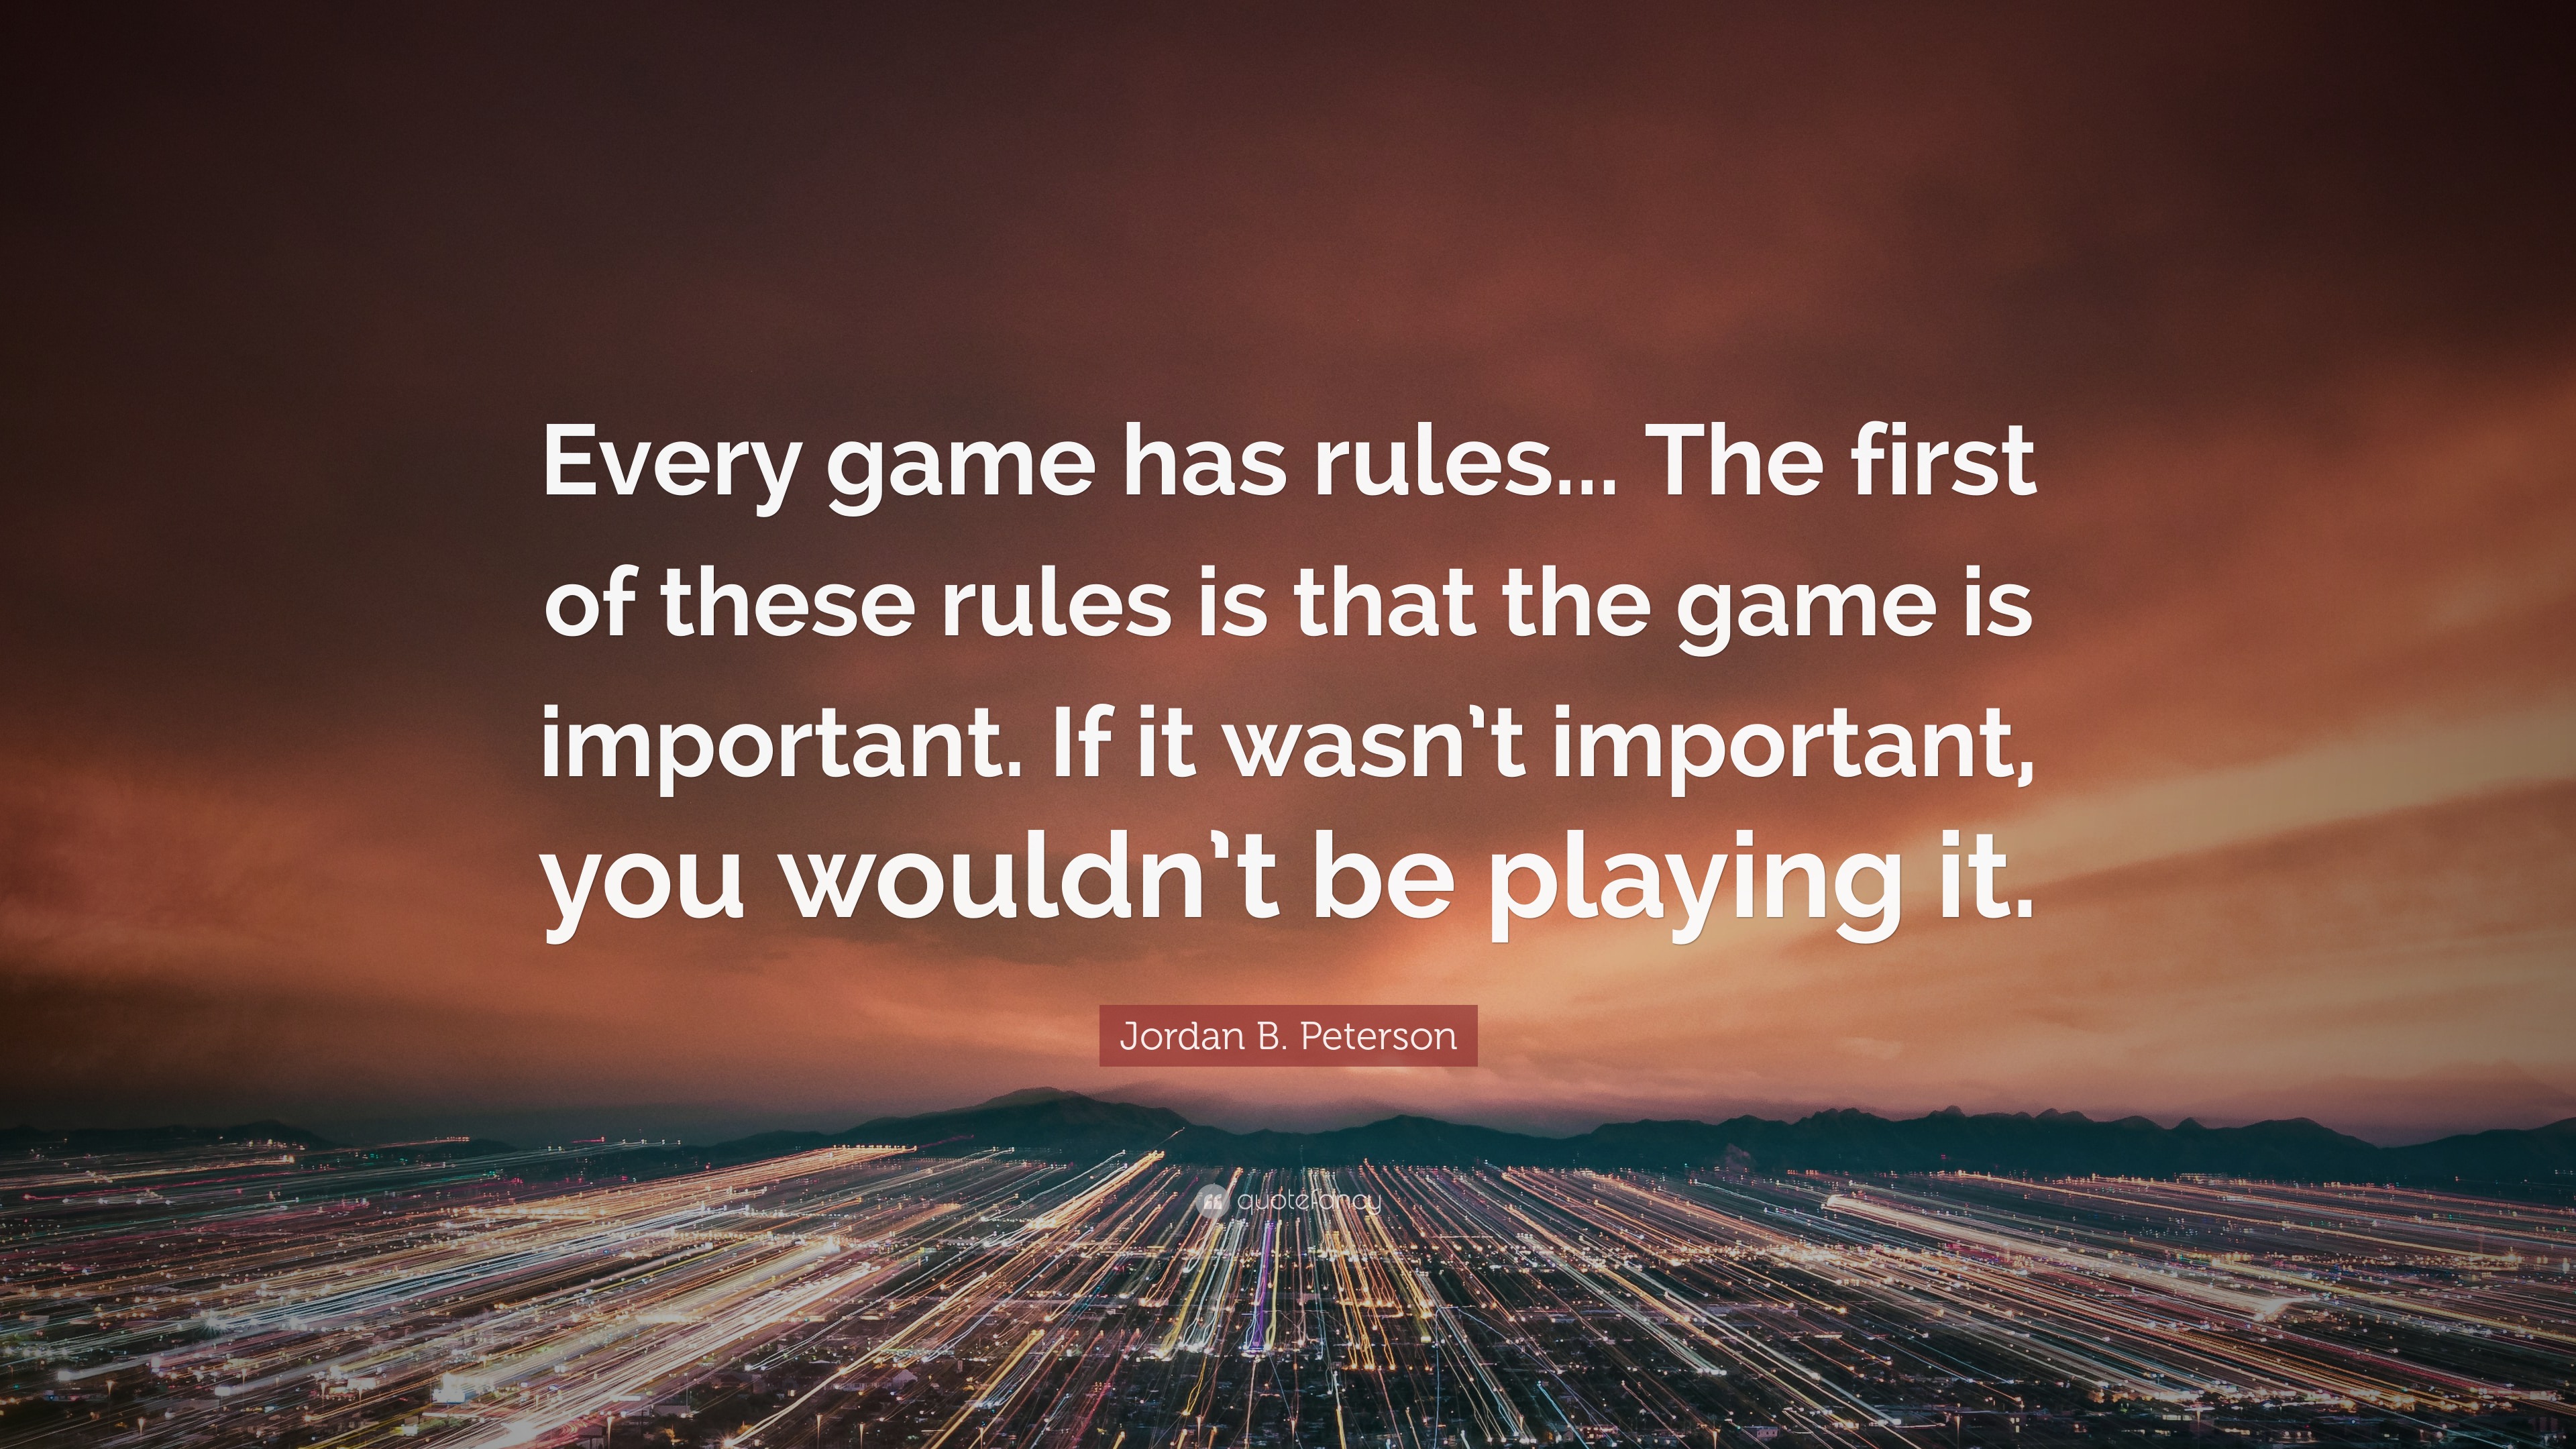 Pre-Owned, If Life Is a Game, These Are the Rules: Ten Rules for